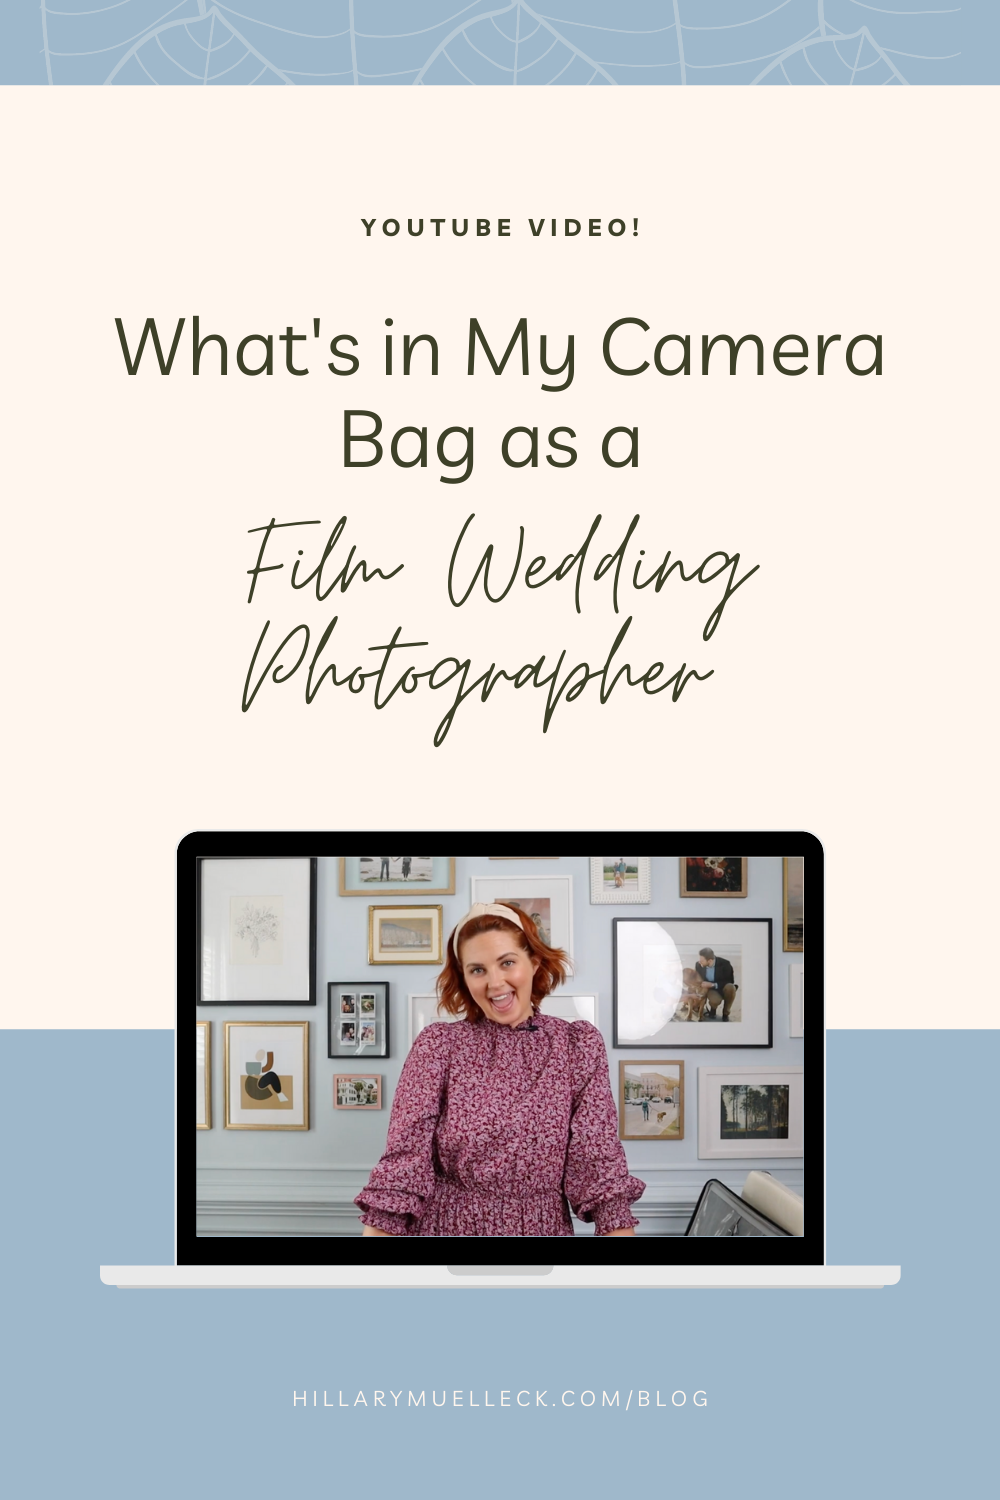 What's in My Camera Bag as a Film Wedding Photographer: Hillary Muelleck shares what's in her bag as a photographer in North Carolina